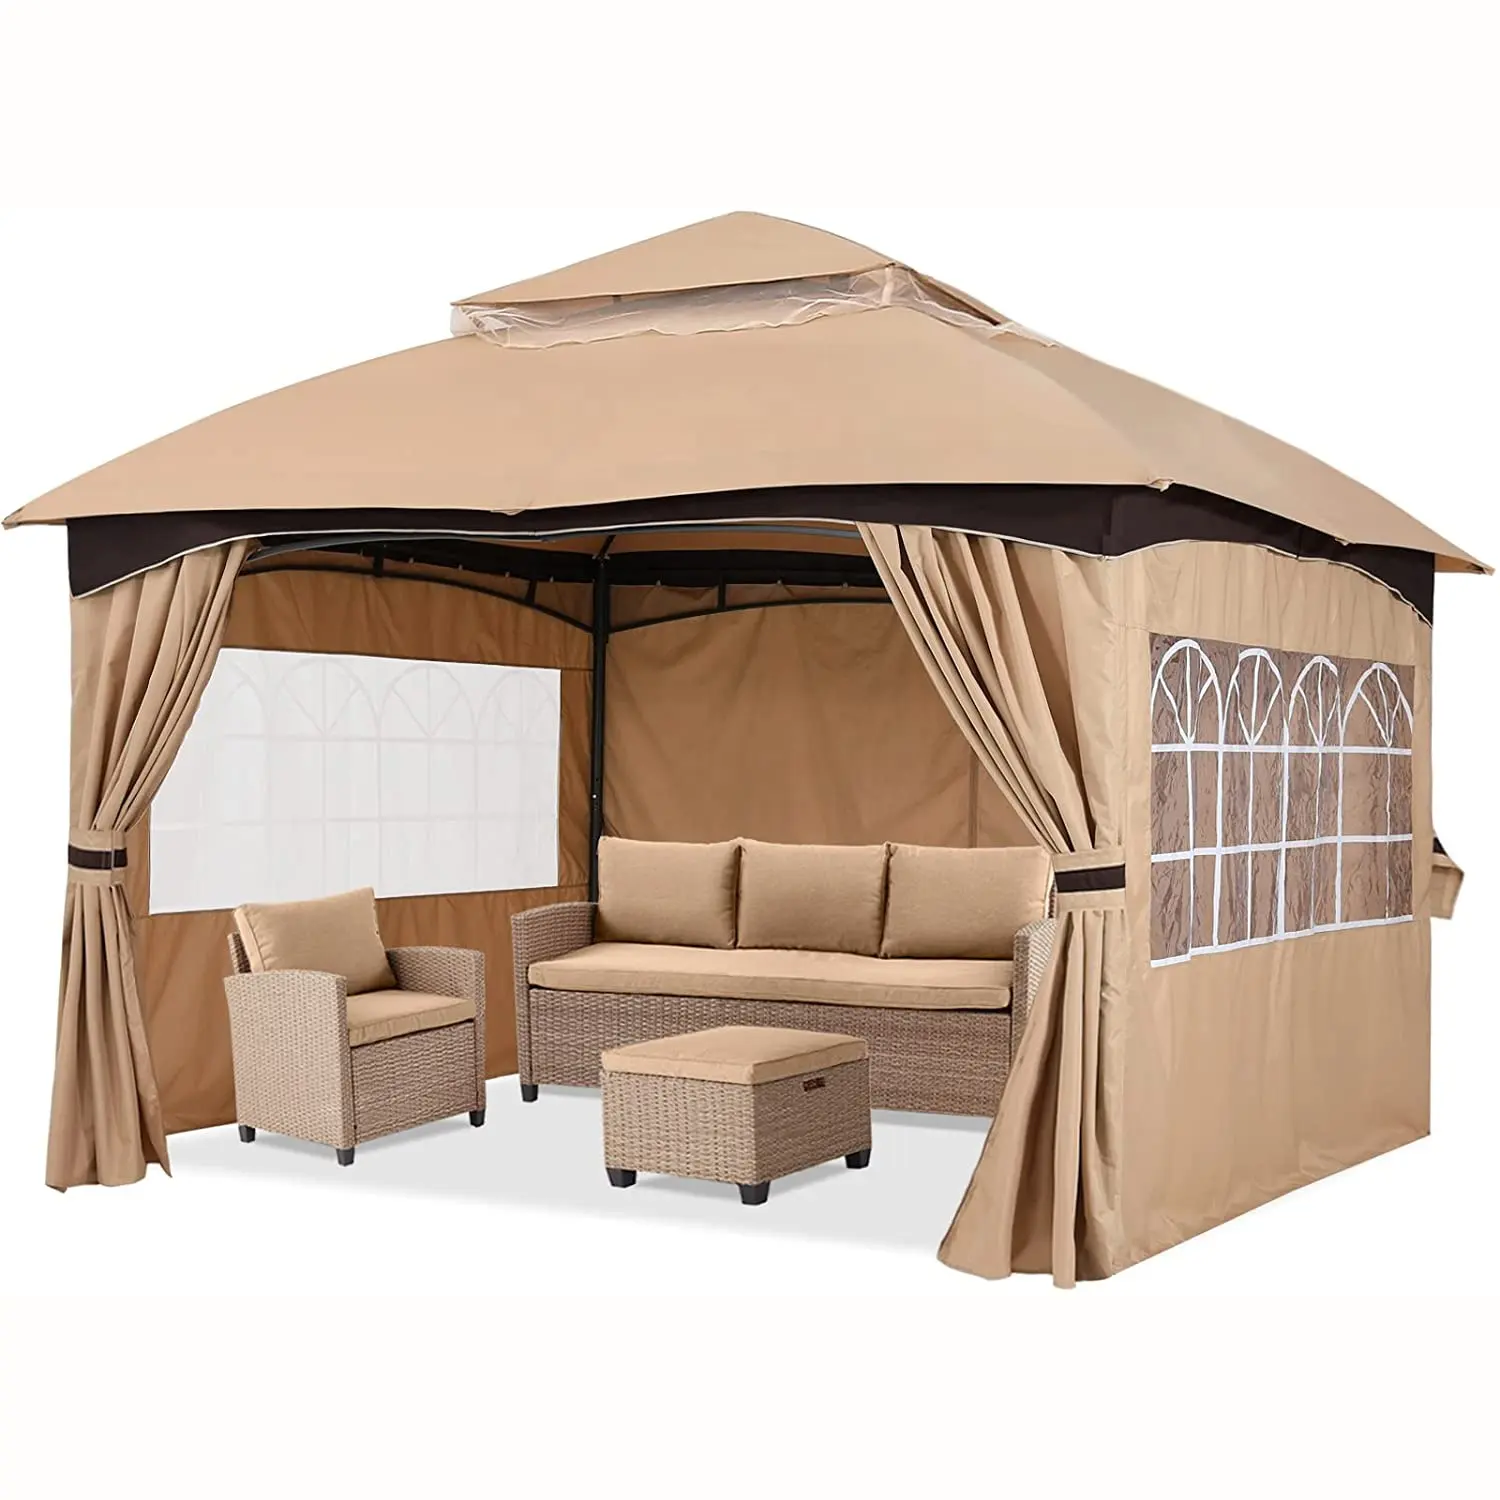 Outdoor Gazebos 10x12 with Window Simulation Church Windows Curtains for Patio Pop-up Canopy Portable Activities Tent